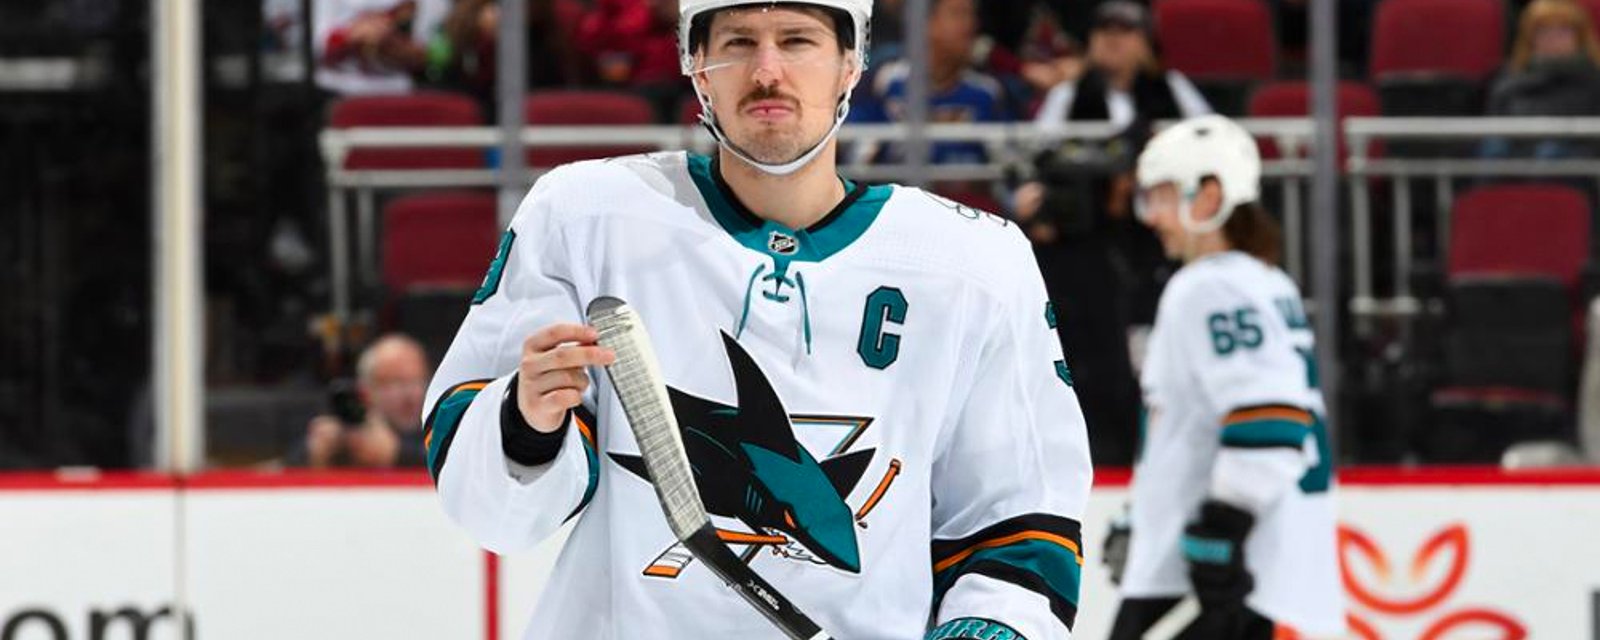 Logan Couture goes on bizarre rant, claims he was assaulted after showing support for Donald Trump 